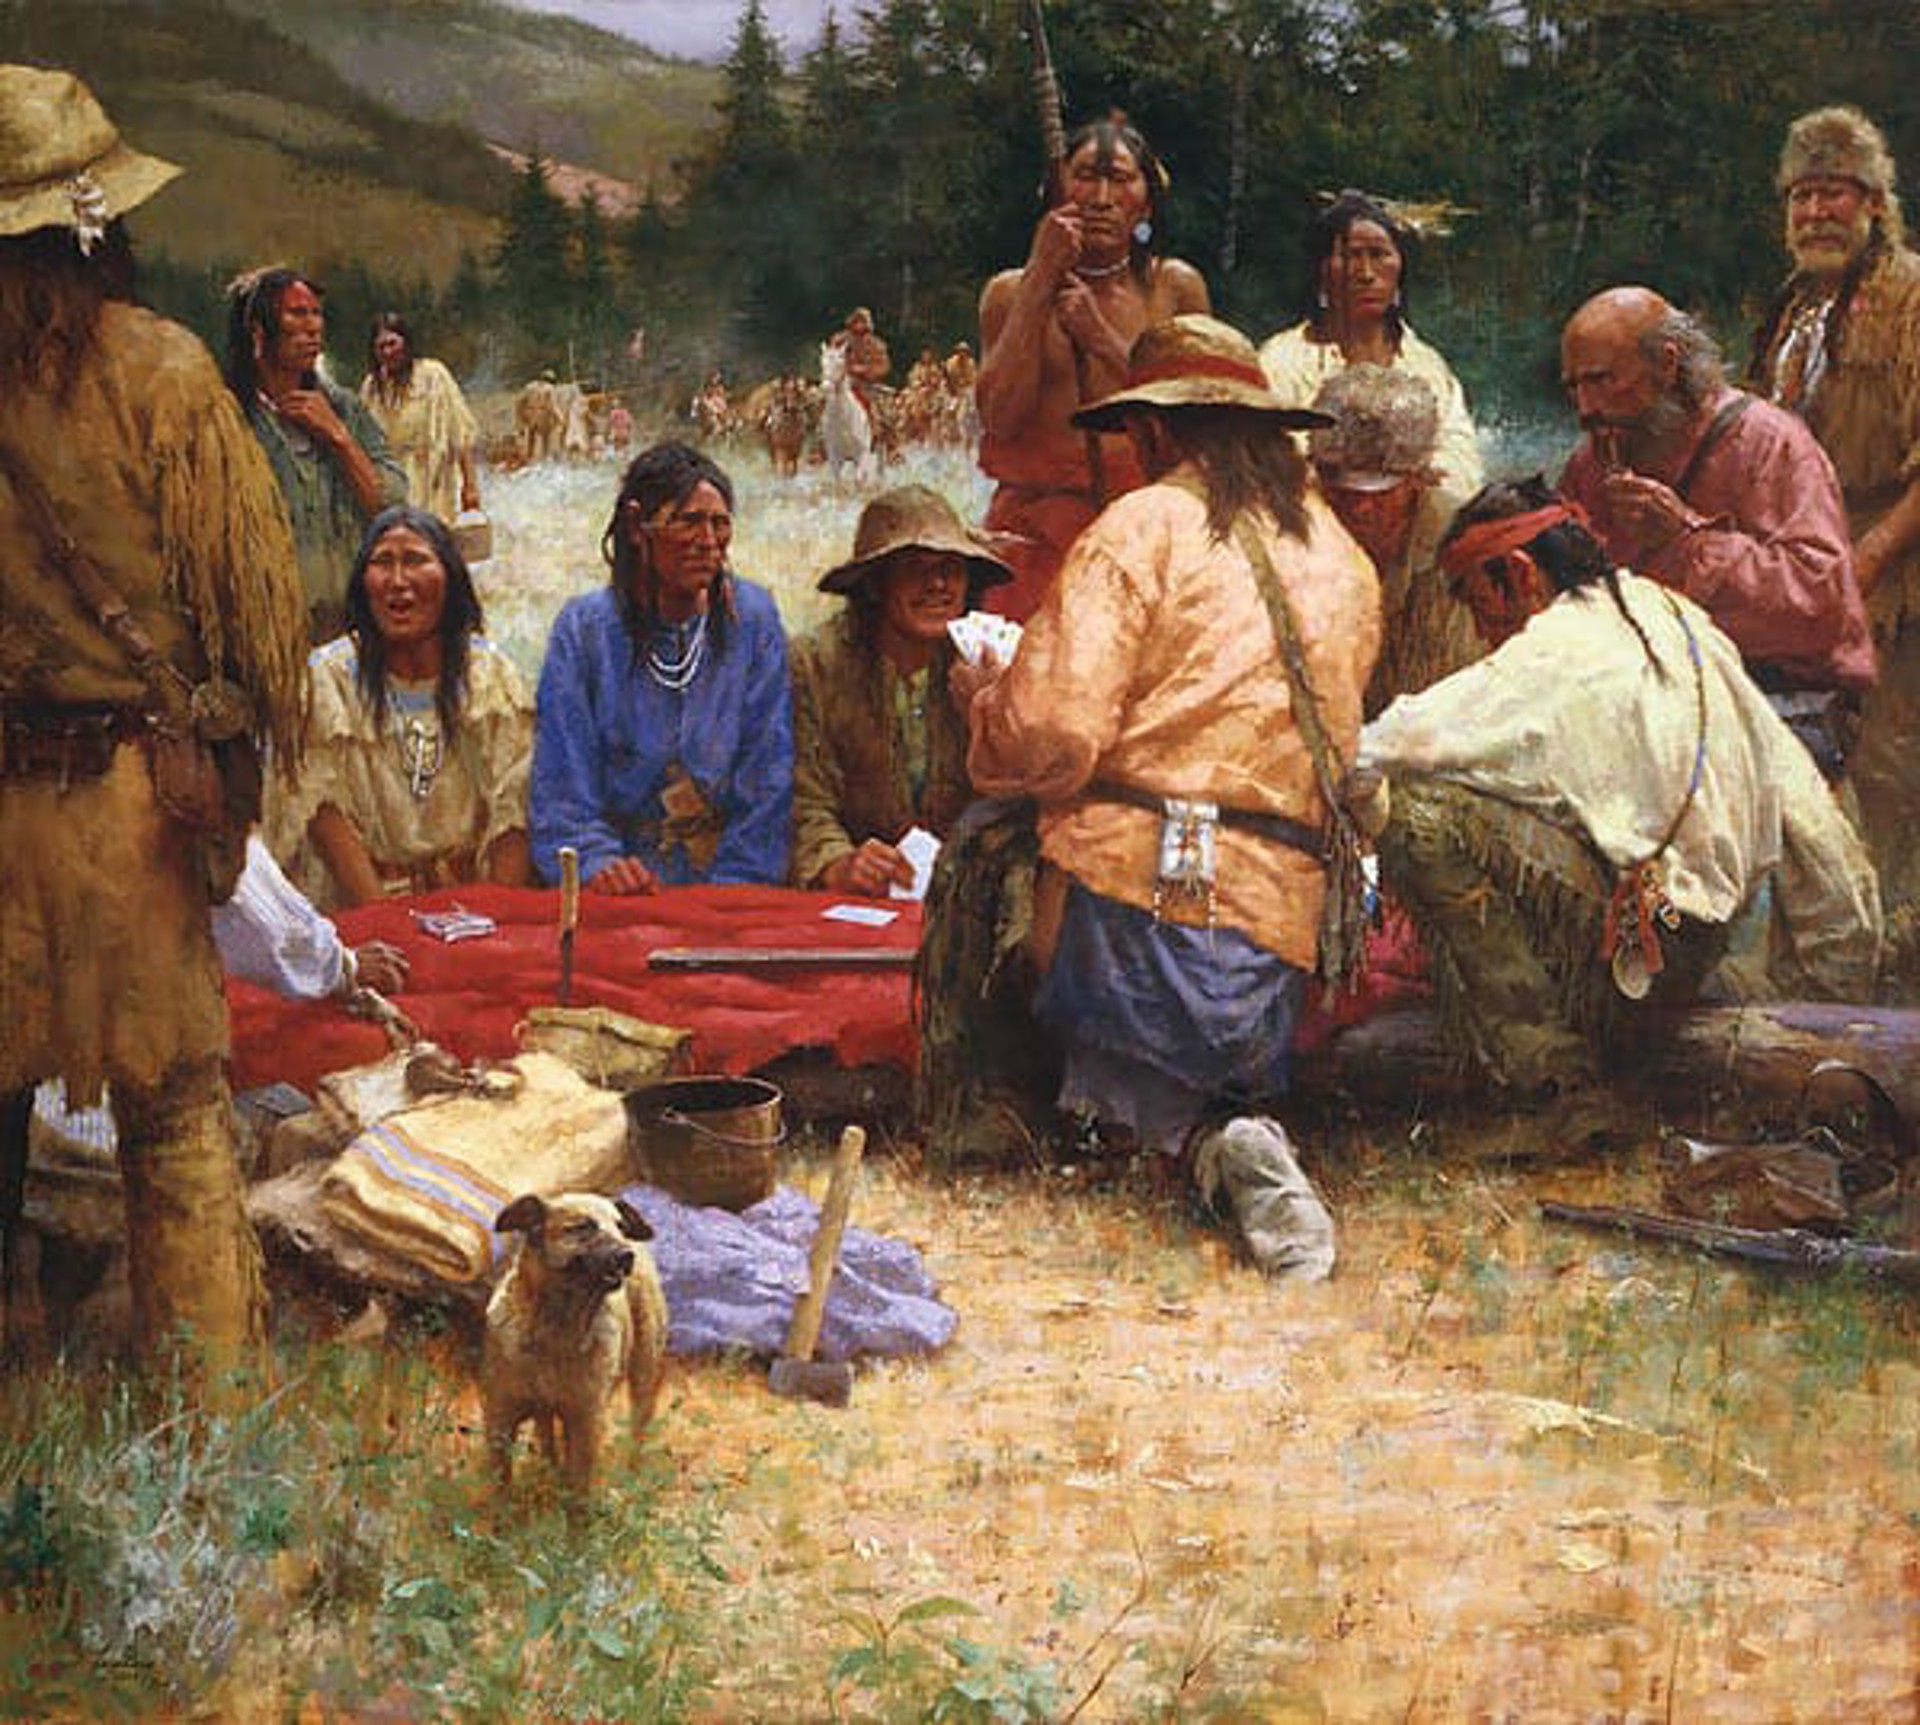 A Friendly Game at Rendezvous 1832 by Howard Terpning